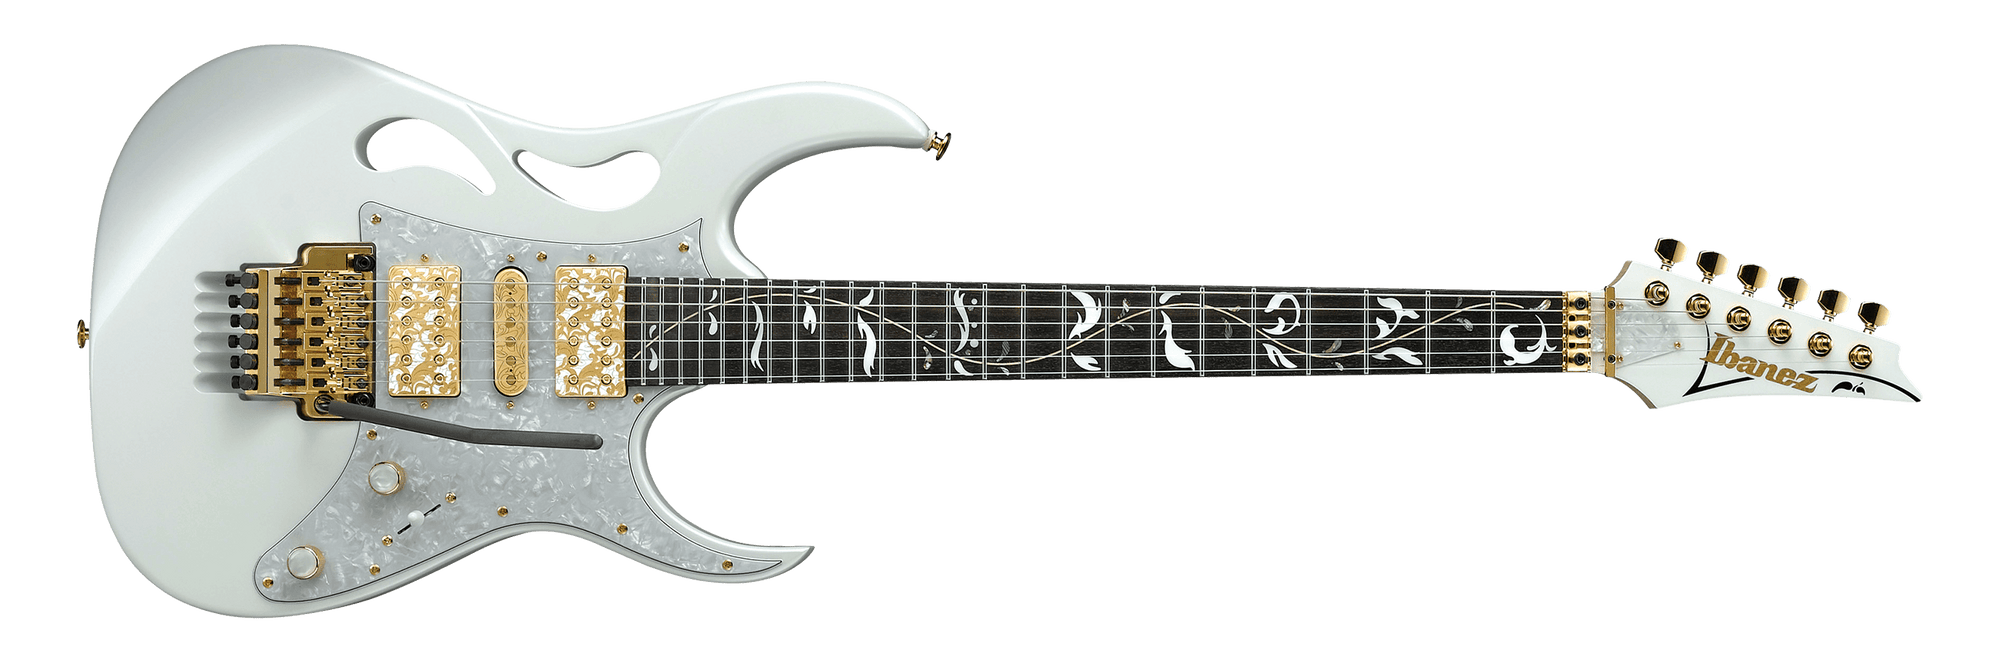 Ibanez PIA3761 Steve Via Signature Electric Guitar in Stallion White - The Guitar World